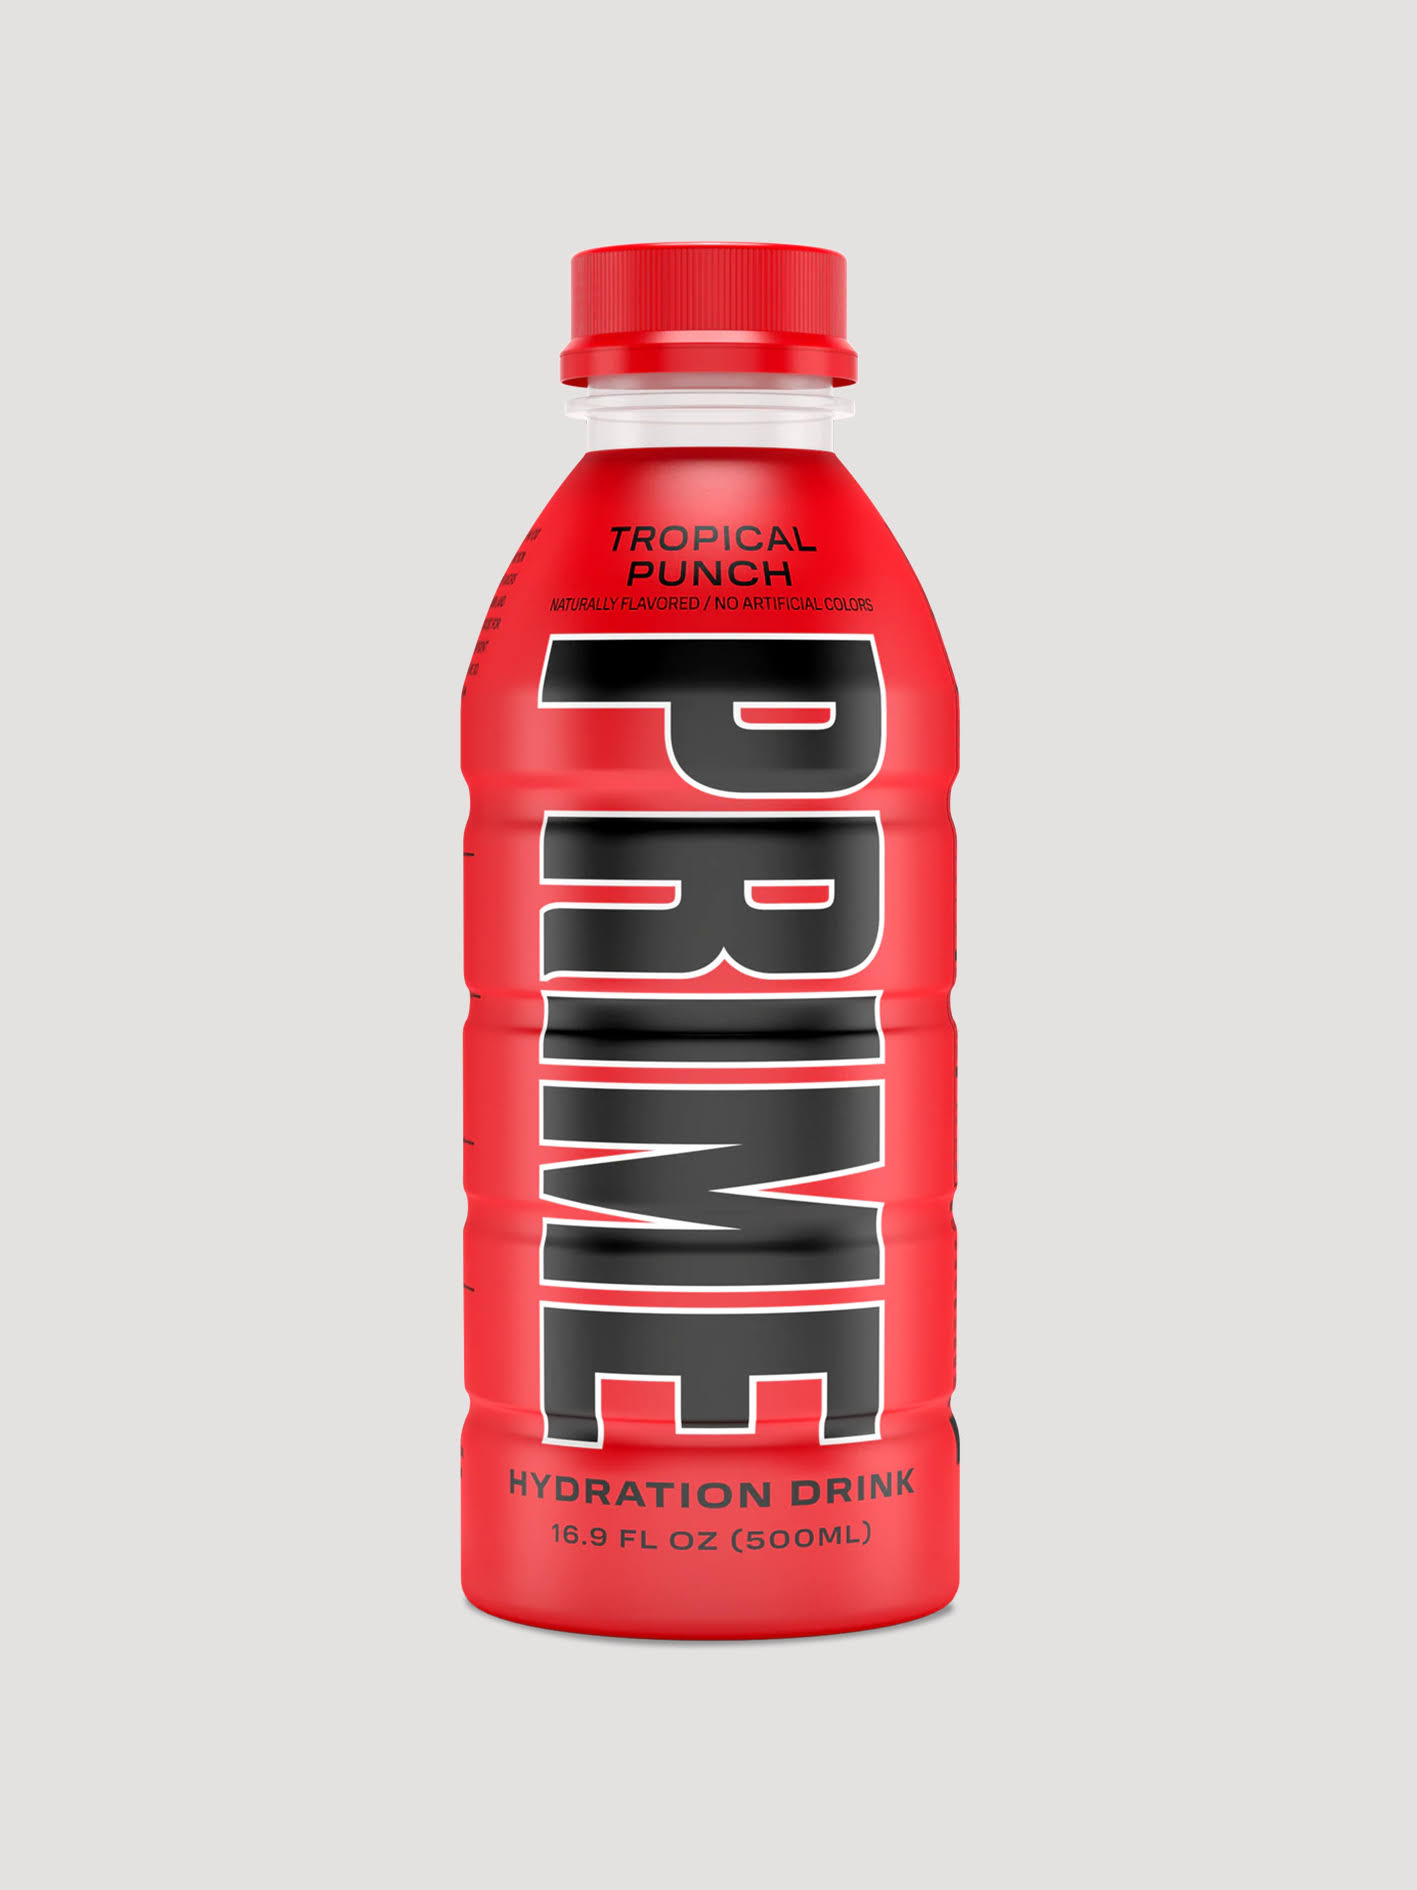 Prime Hydration - Tropical Punch. Prime. Tropical Punch. Energy & Hydration. 850003560441.